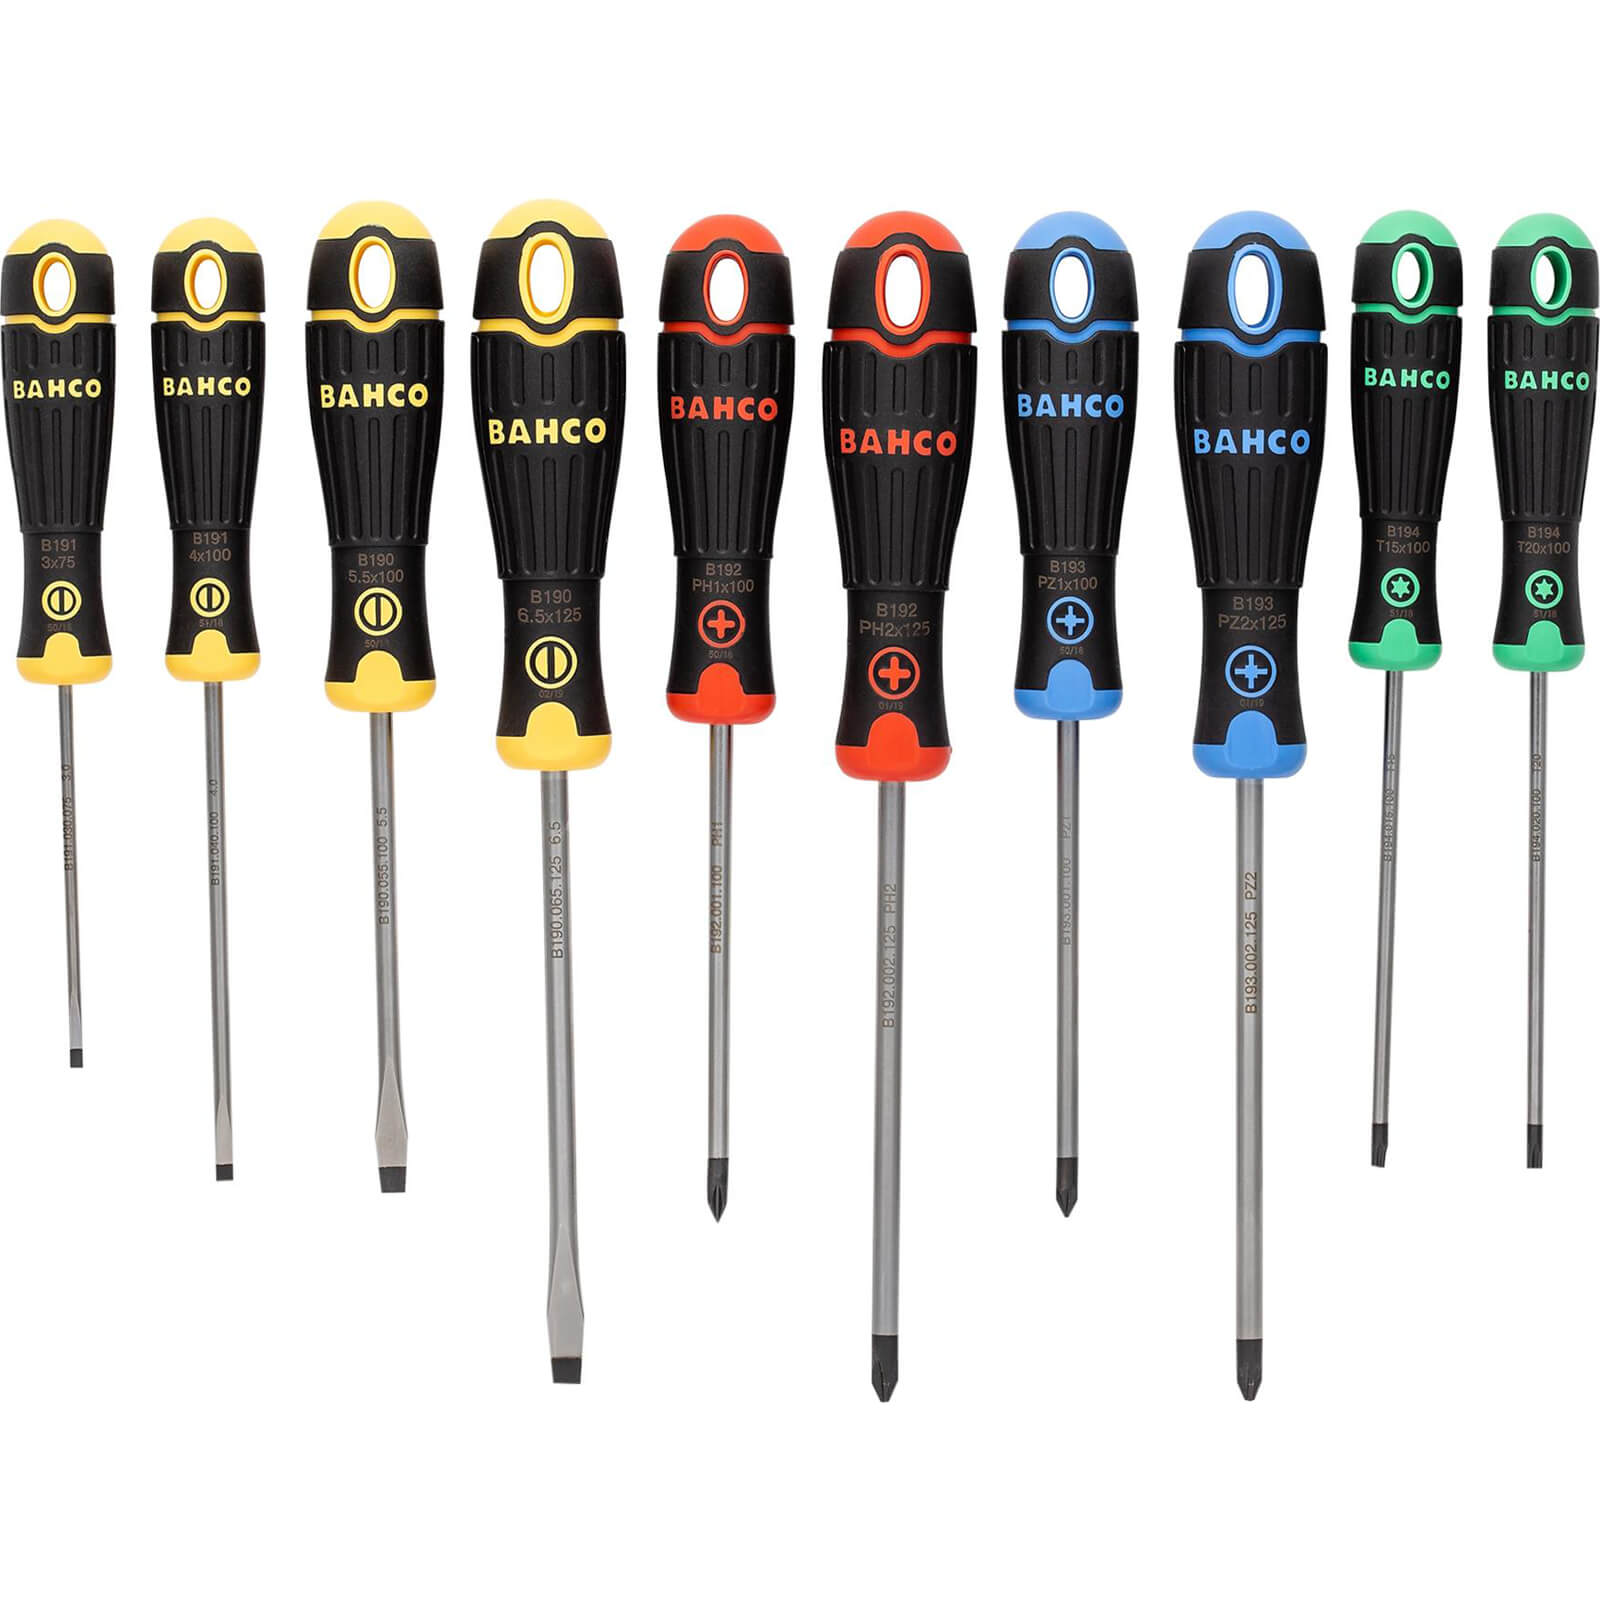 Photo of Bahco Bahcofit 10 Piece Colour Coded Screwdriver Set